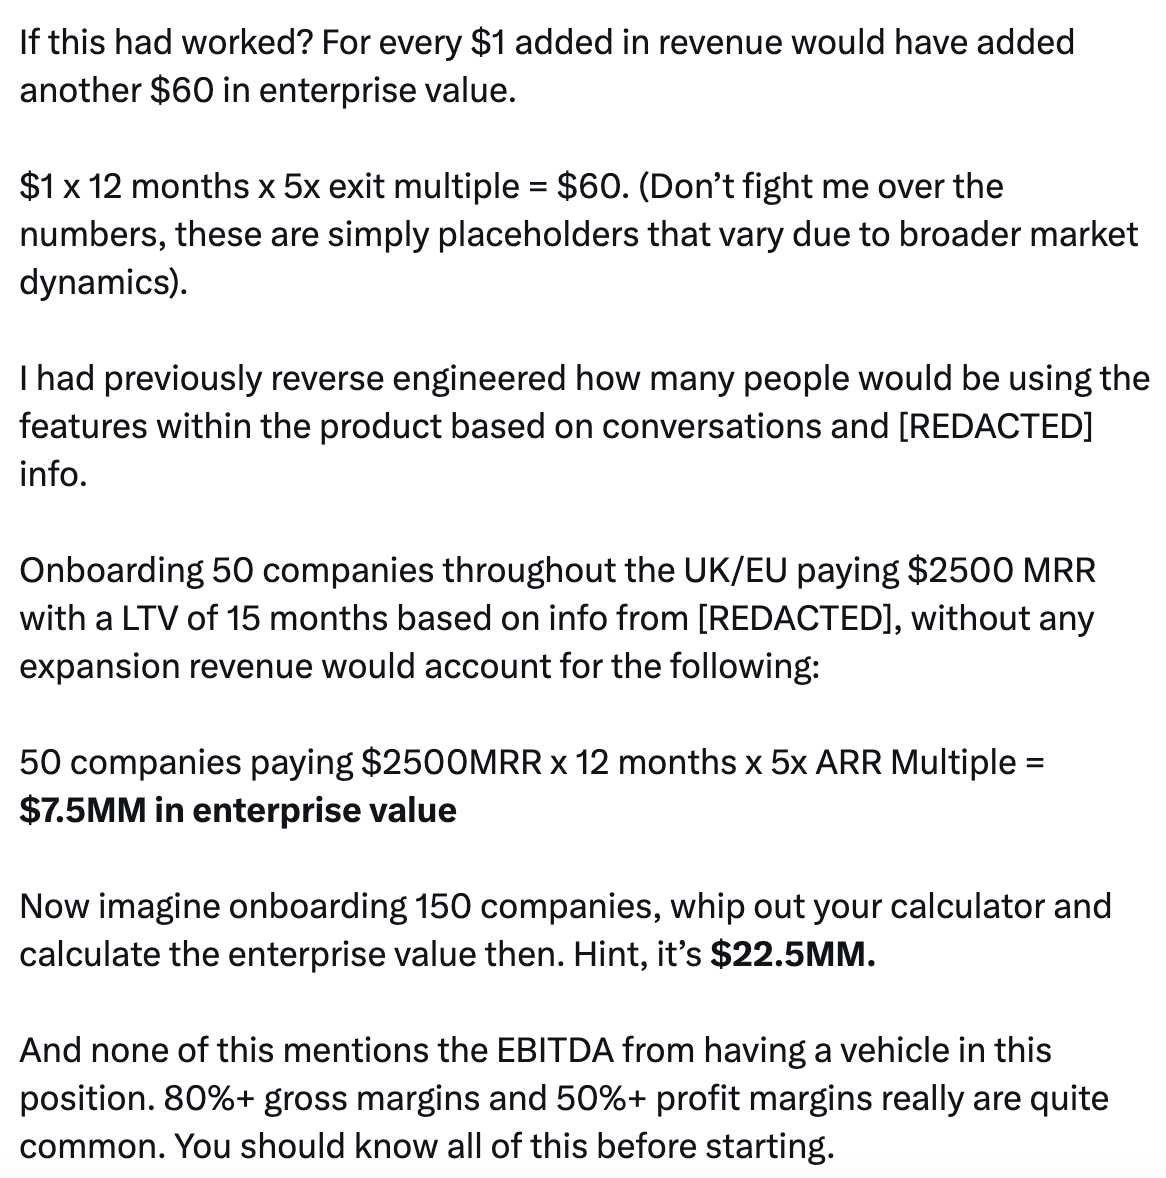 A snippet from the SaaS controversy tweet spoken about in this article. Read the full article for more information and don't forget to let us know your thoughts!